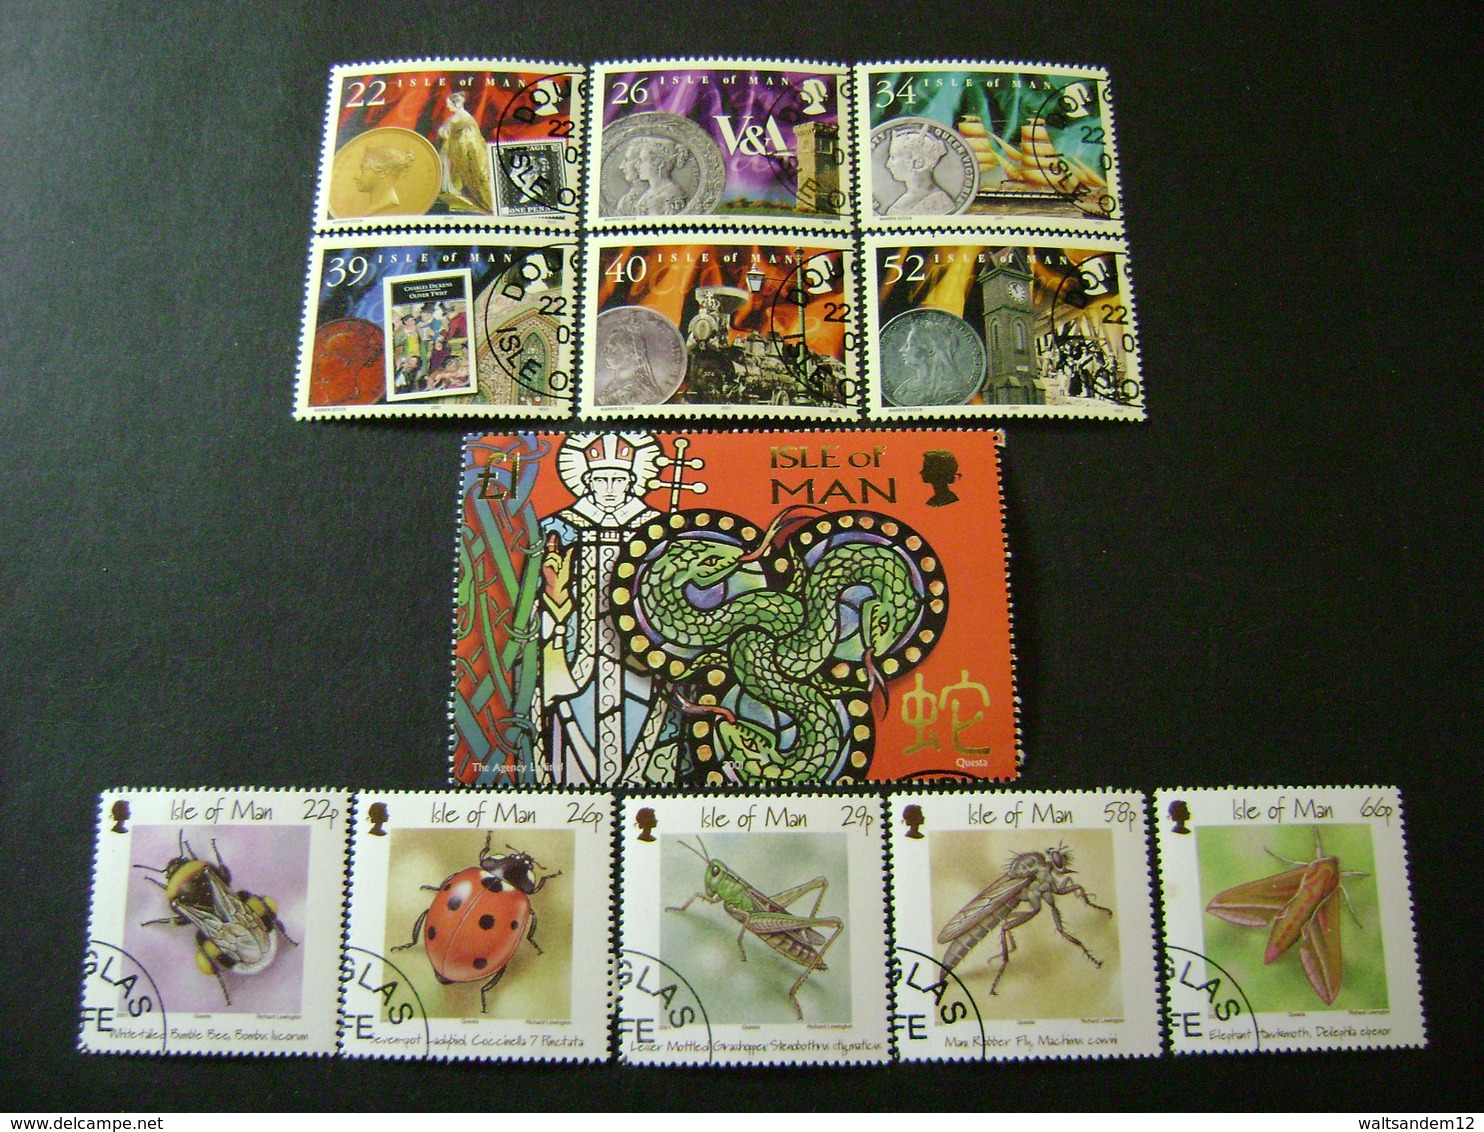 Isle Of Man 2001 Commemorative/special Issues (SG 917-957, 959-969) 3 Images - Used [Sale Price] - Isle Of Man